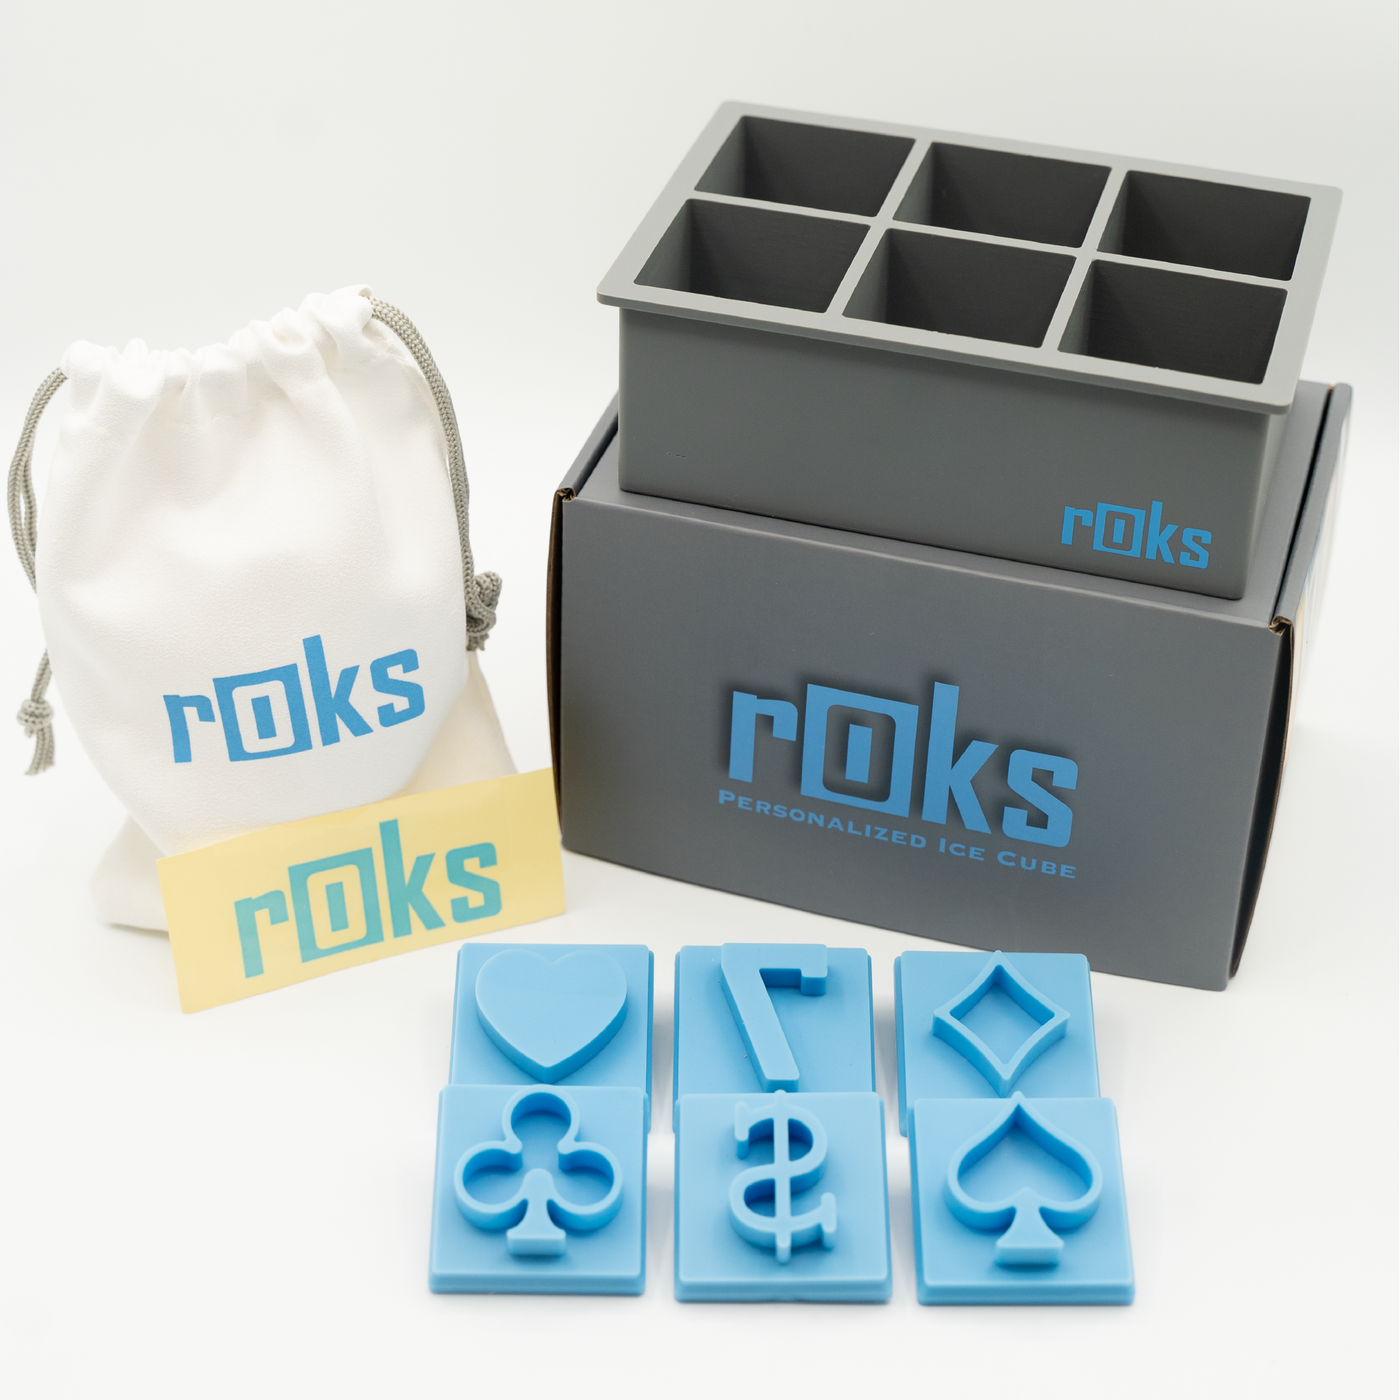 Rox Football Ice Cube Tray for Football Fans & Game Day, Large